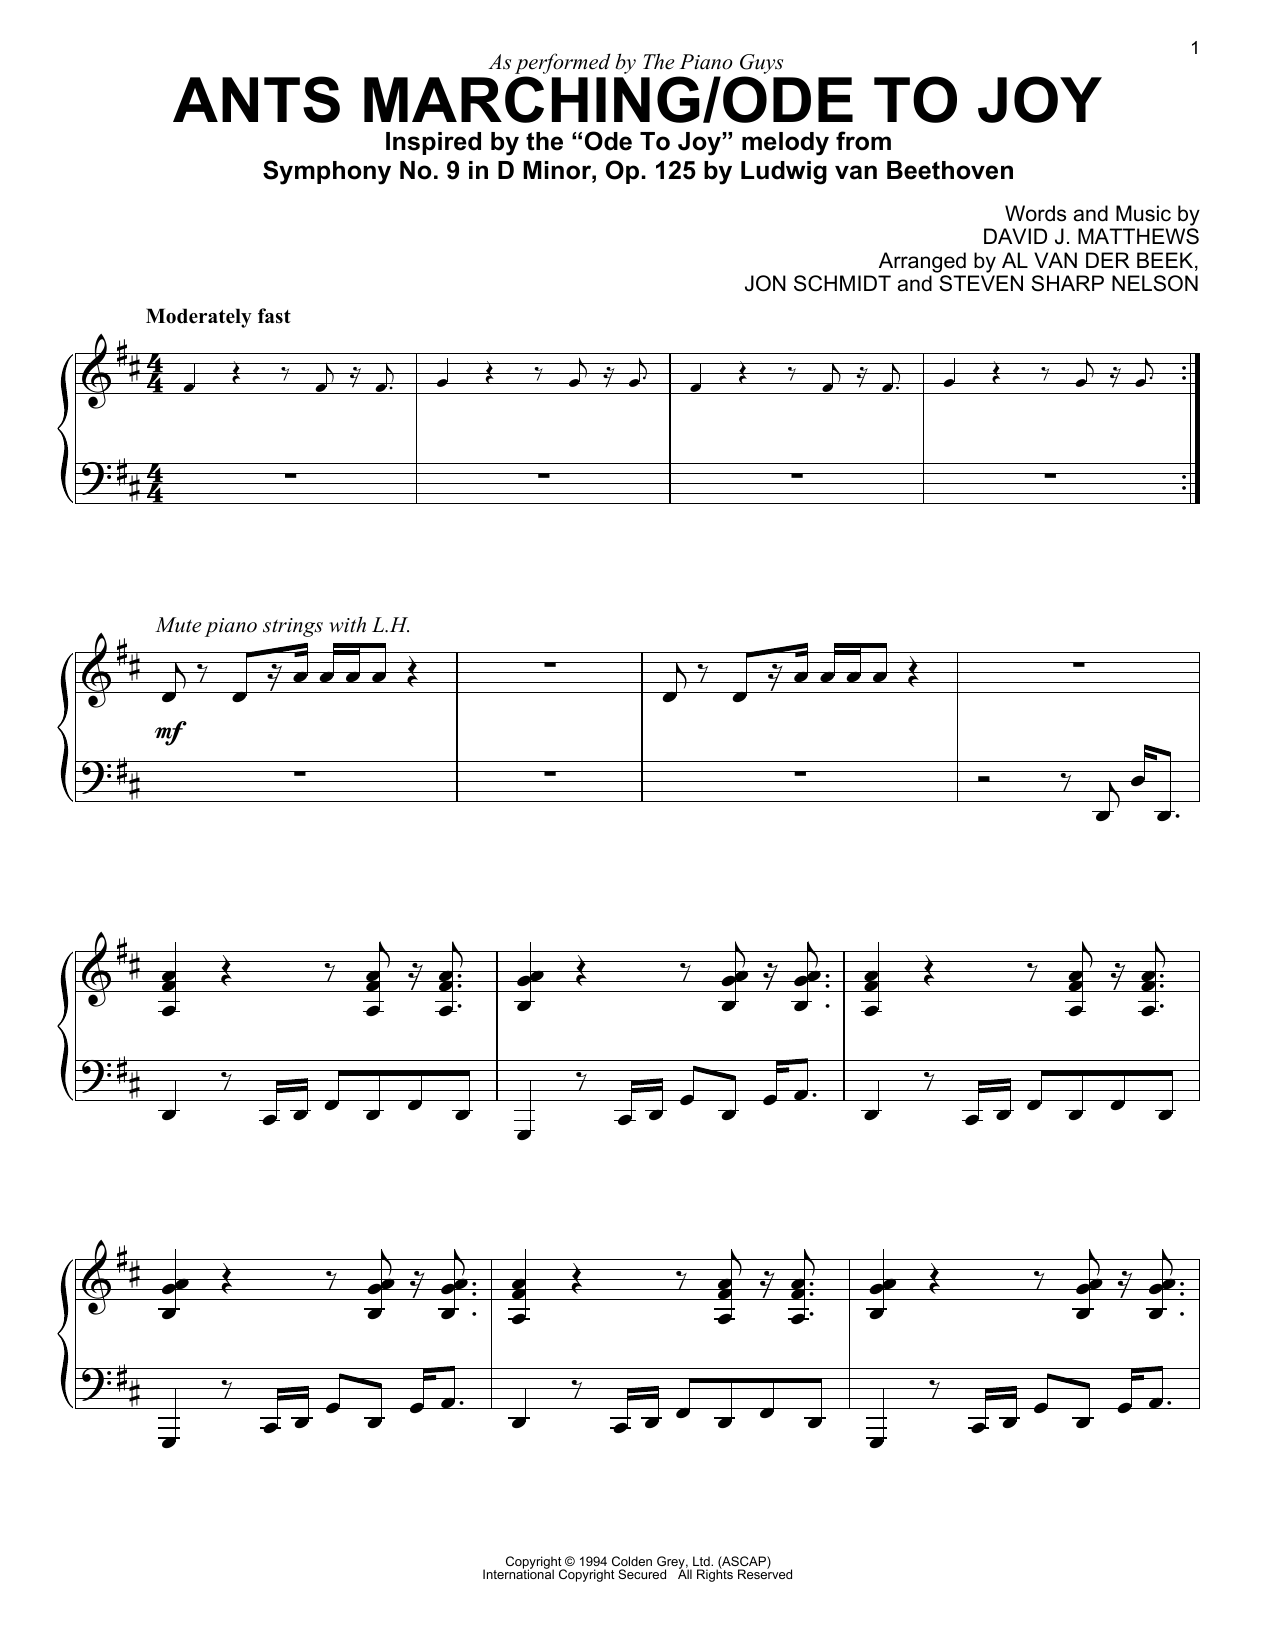 Download The Piano Guys Ants Marching/Ode To Joy Sheet Music